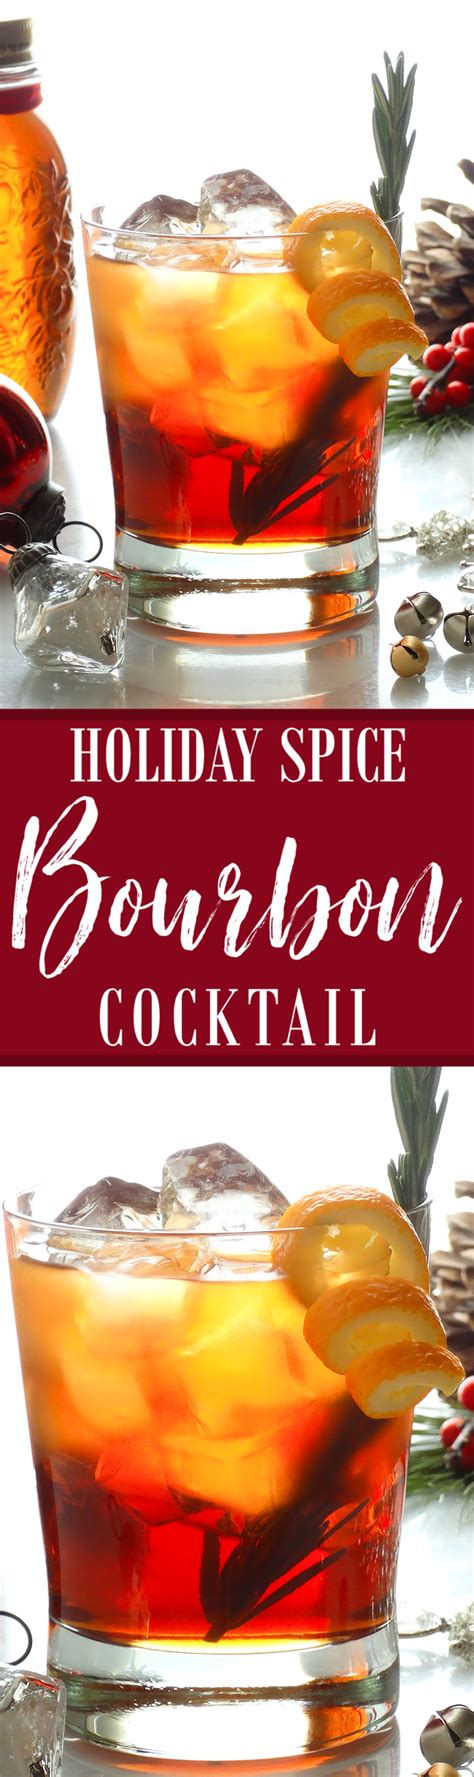 These 12 christmas drink recipes are easy to make & are sure to spread holiday cheer! Bourbon Christmas Cocktails - Naughty but Nice Christmas Cocktail - delicious holiday ...